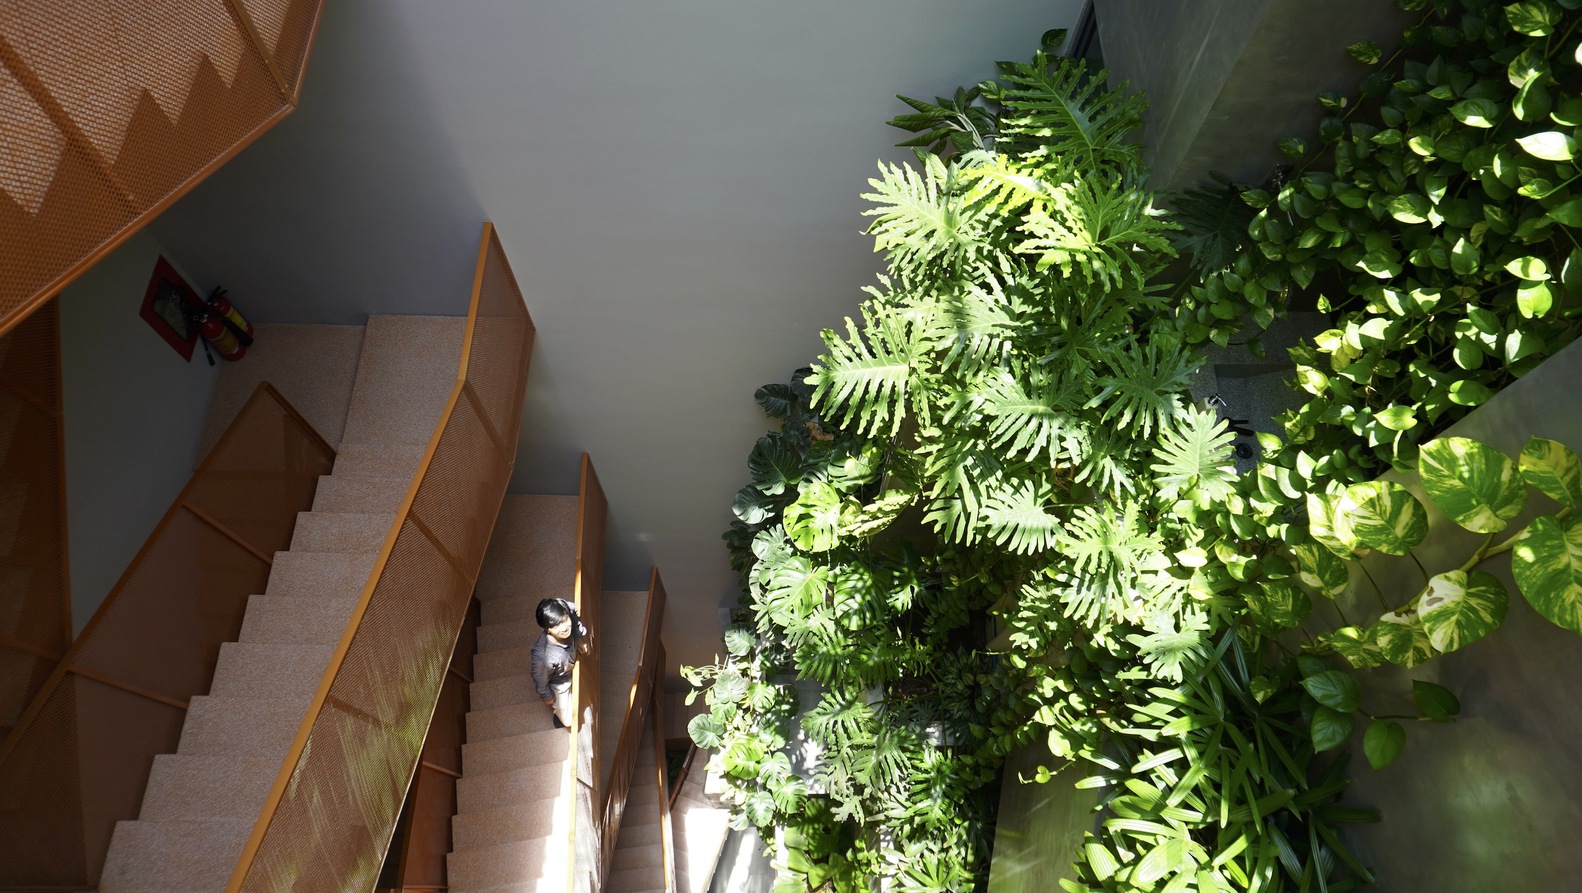 Inside Shelter Stay's brutalist structure is a central stairwell with a greenwall alongside it.